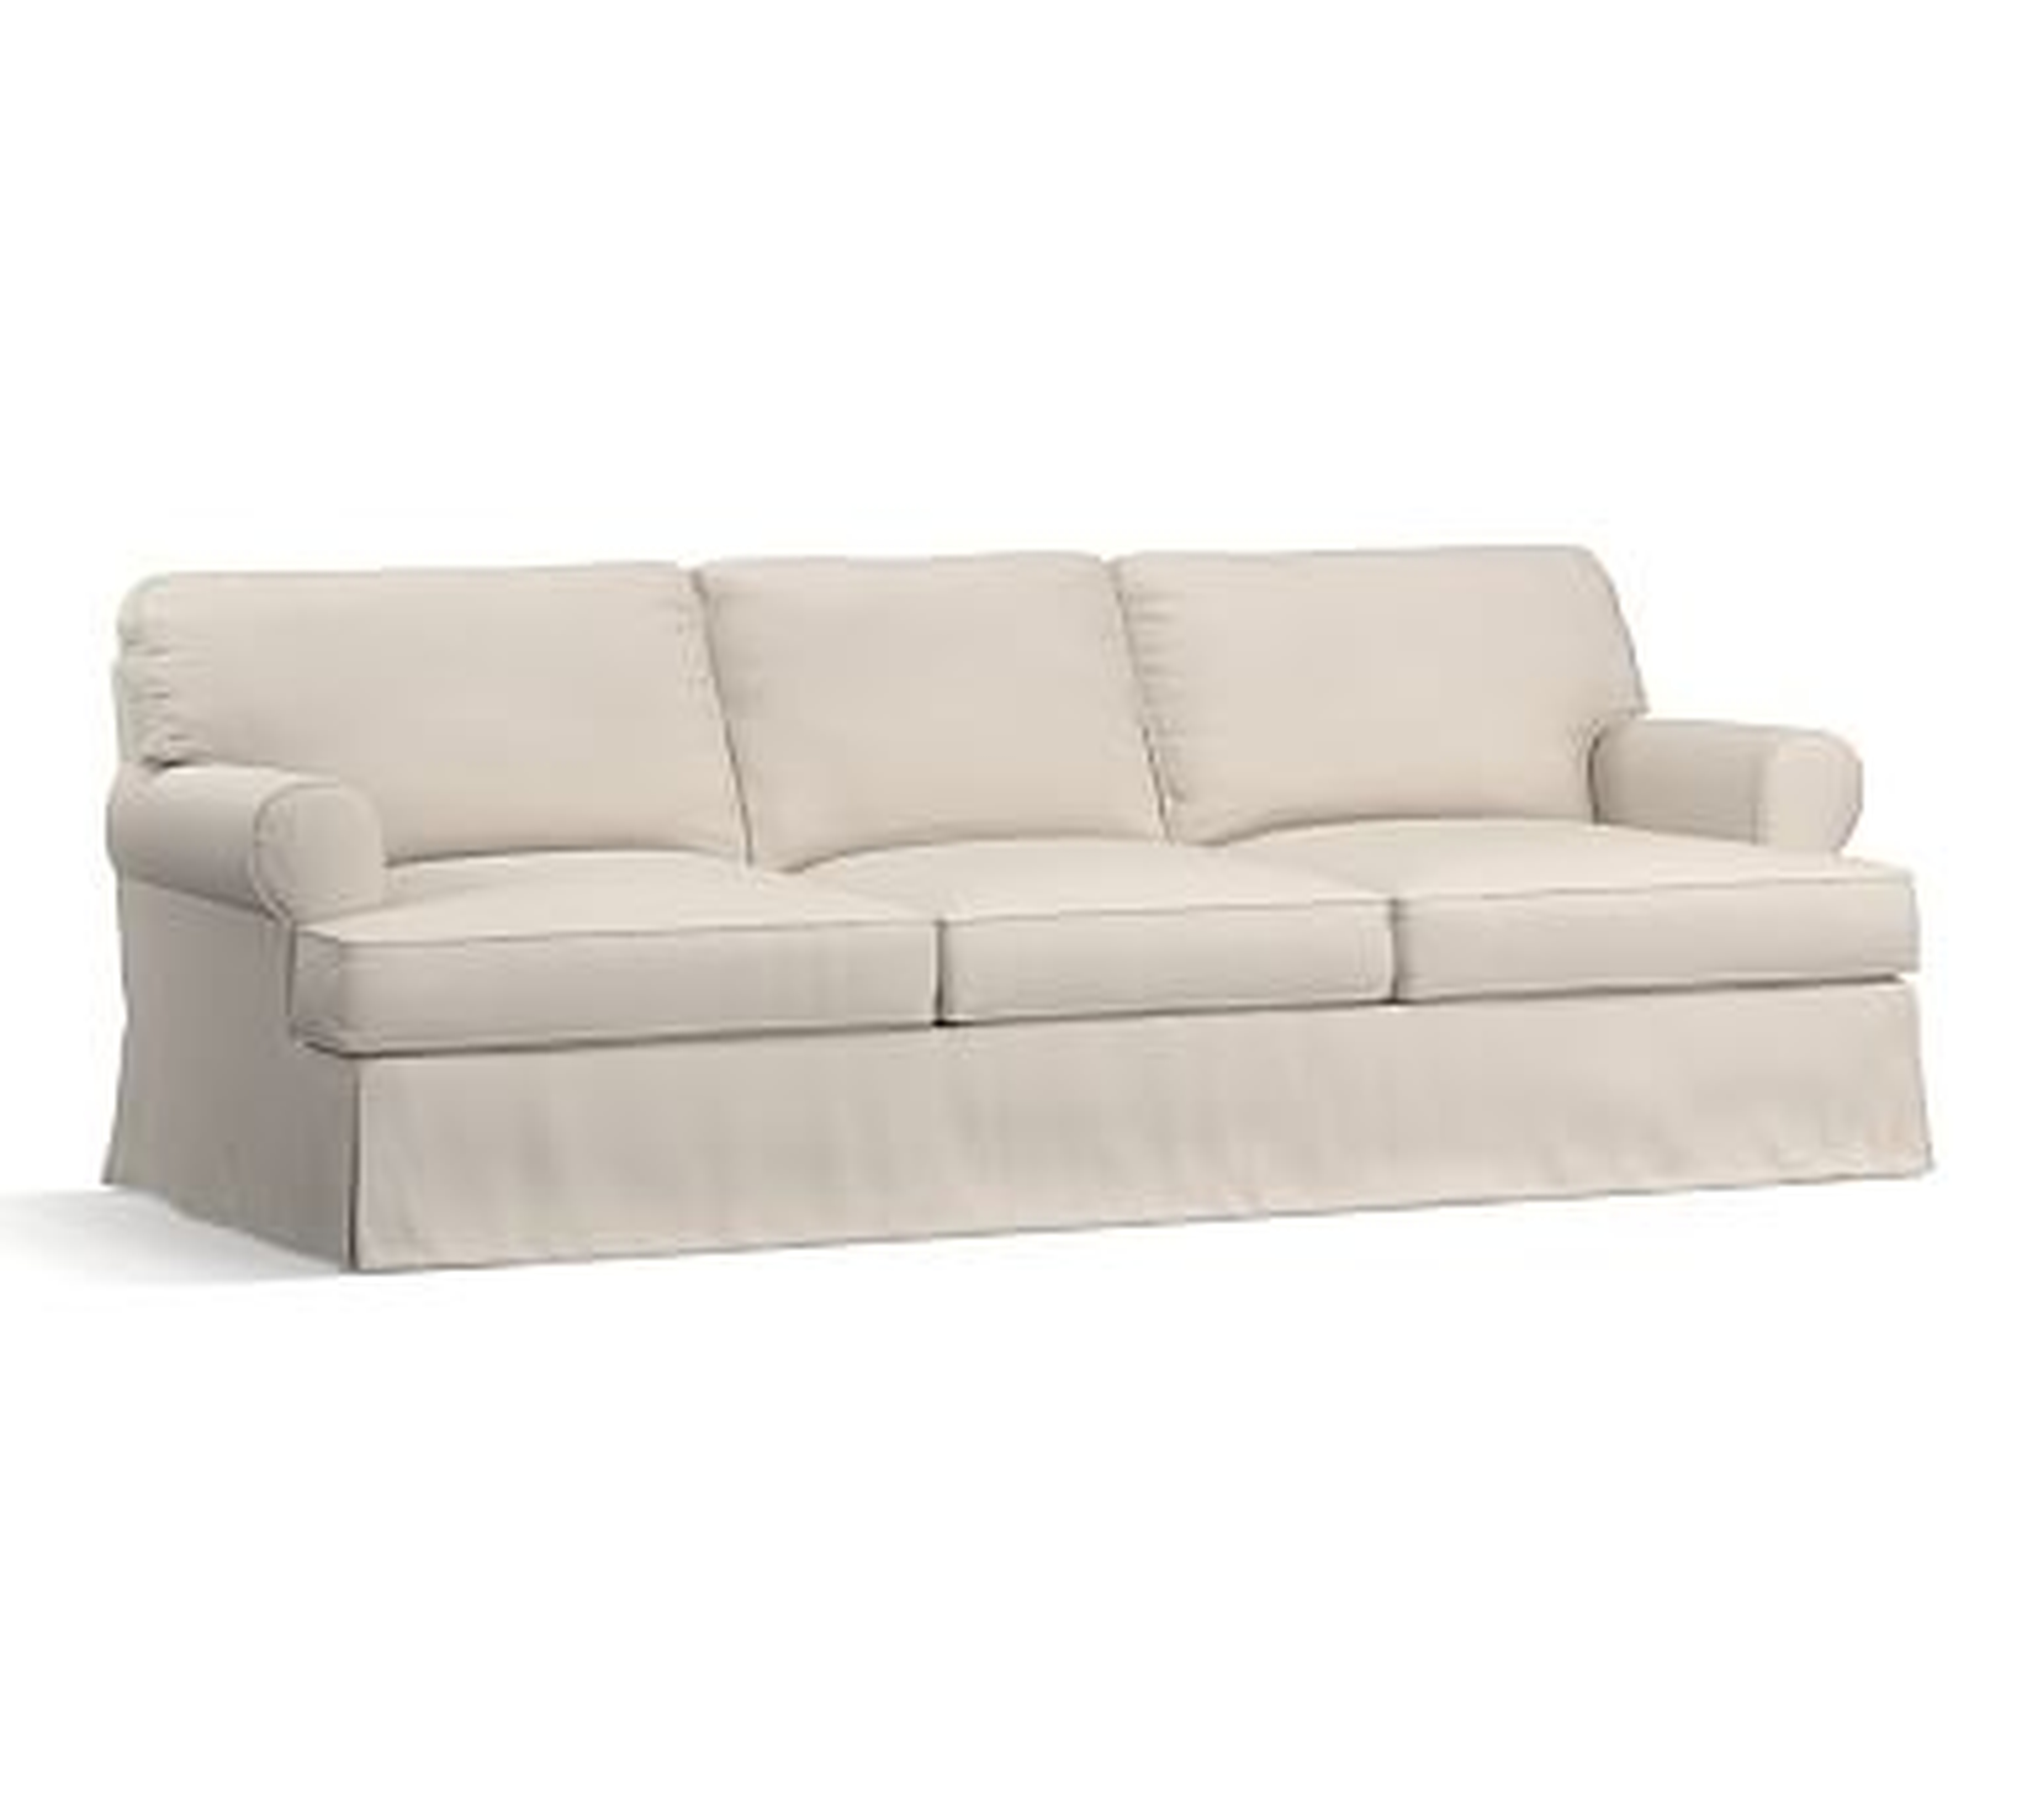 Townsend Roll Arm Slipcovered Grand Sofa 101.5&amp;quot,, Polyester Wrapped Cushions, Performance Twill Stone - Pottery Barn